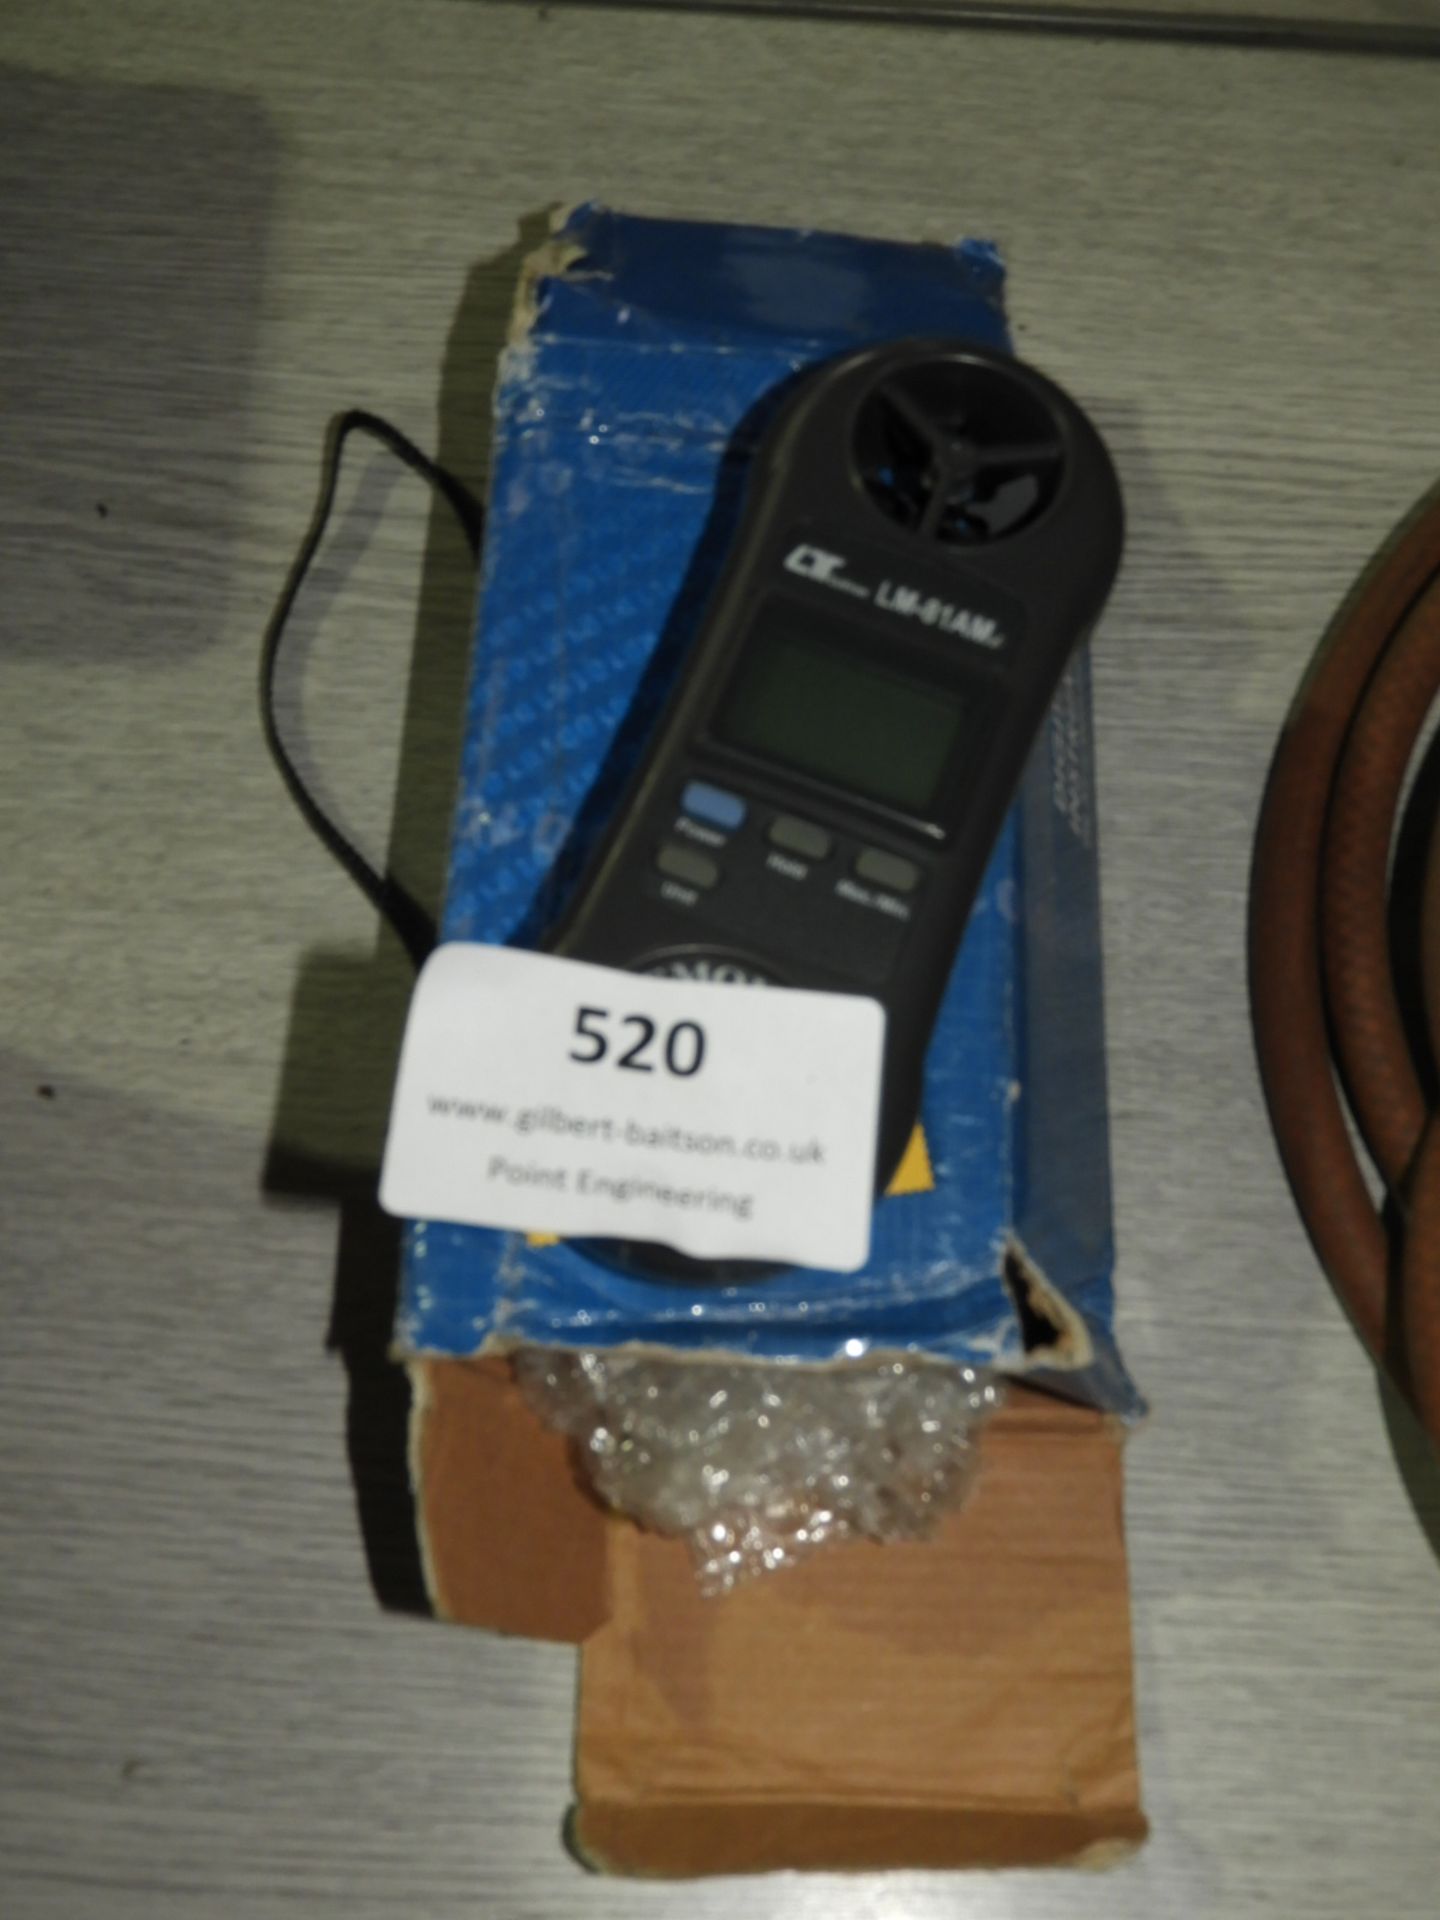 *Lutron LM-81AM Anemometer (Wind Speed Measure)